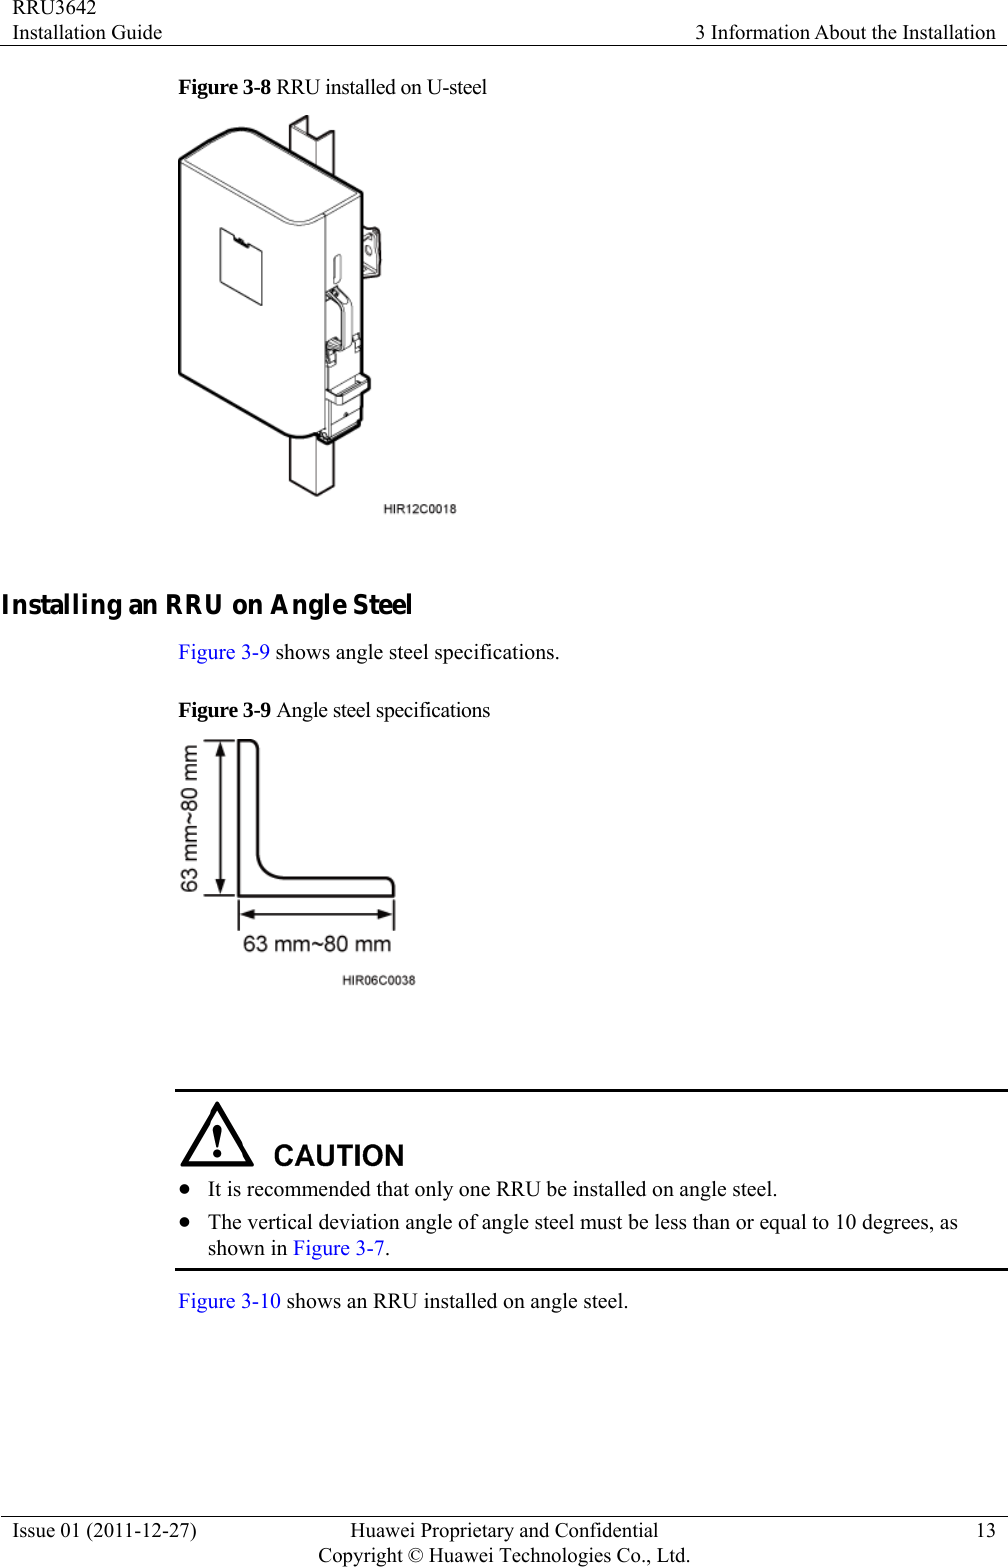 RRU3642 Installation Guide  3 Information About the Installation Issue 01 (2011-12-27)  Huawei Proprietary and Confidential         Copyright © Huawei Technologies Co., Ltd.13 Figure 3-8 RRU installed on U-steel   Installing an RRU on Angle Steel Figure 3-9 shows angle steel specifications. Figure 3-9 Angle steel specifications     z It is recommended that only one RRU be installed on angle steel. z The vertical deviation angle of angle steel must be less than or equal to 10 degrees, as shown in Figure 3-7. Figure 3-10 shows an RRU installed on angle steel. 